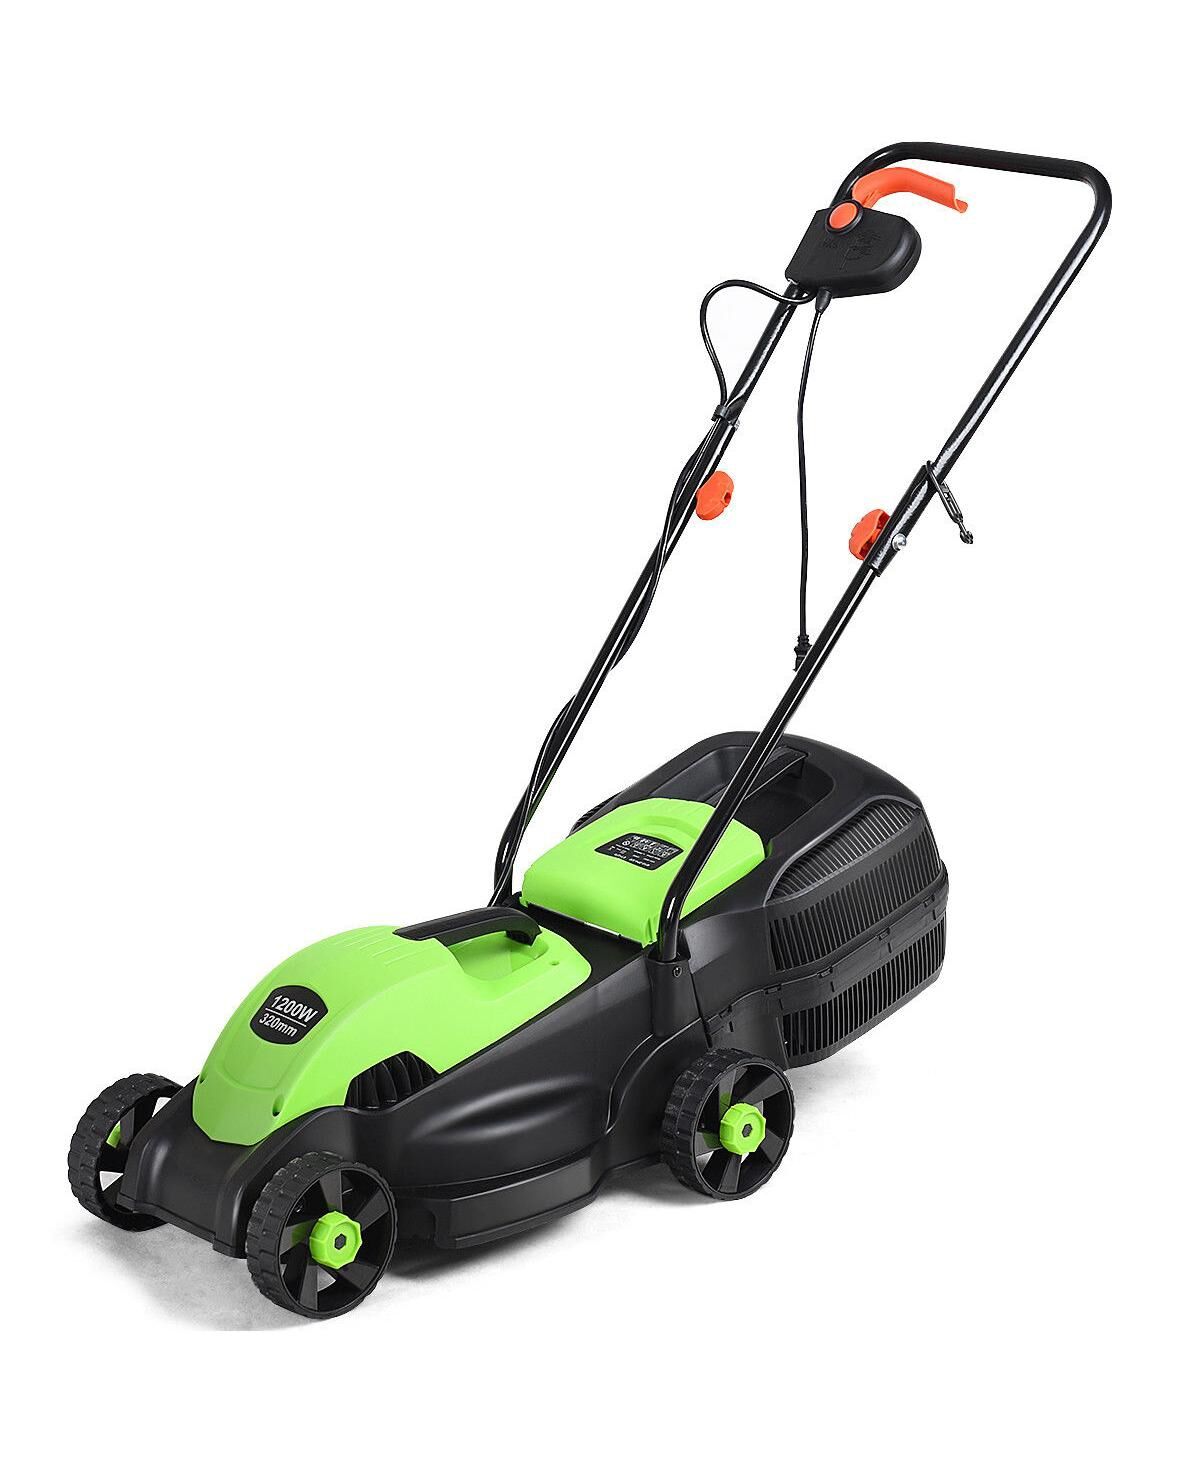 Costway 12 Amp 14-Inch Electric Push Lawn Corded Mower With Grass Bag - Green